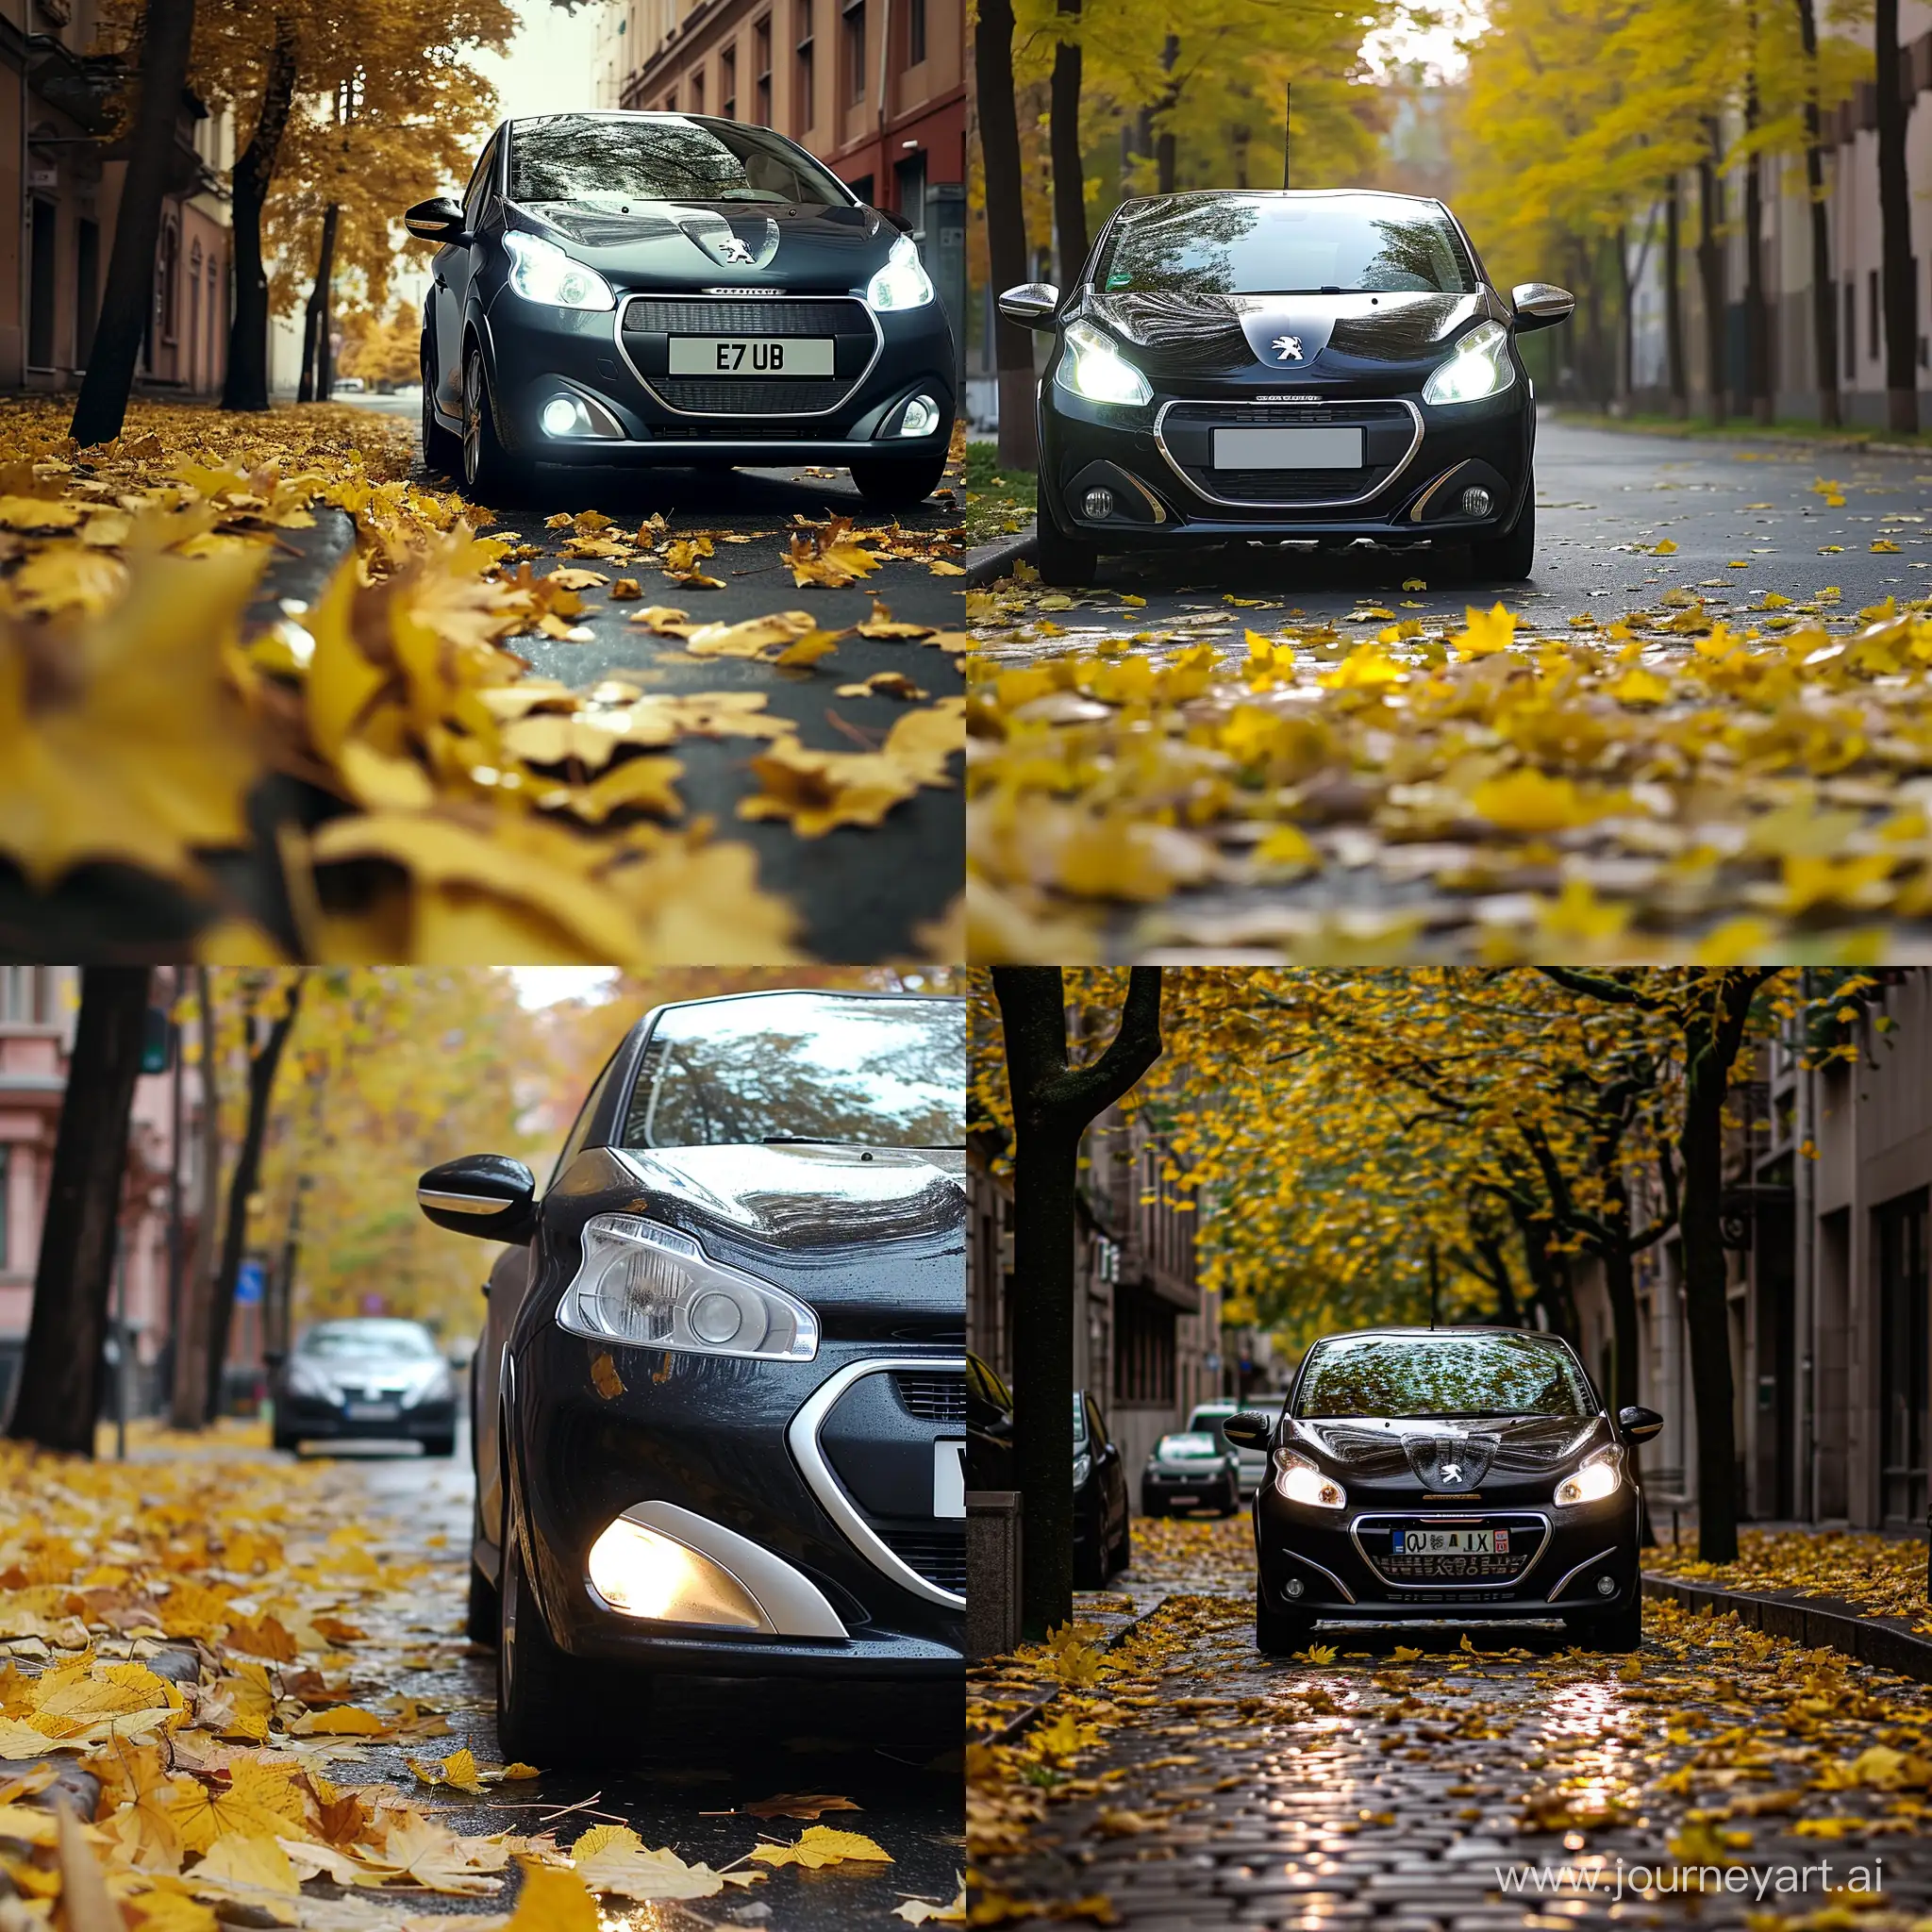 Peugeot-207-High-Beam-Front-Light-Day-Scene-with-Yellow-Leaves